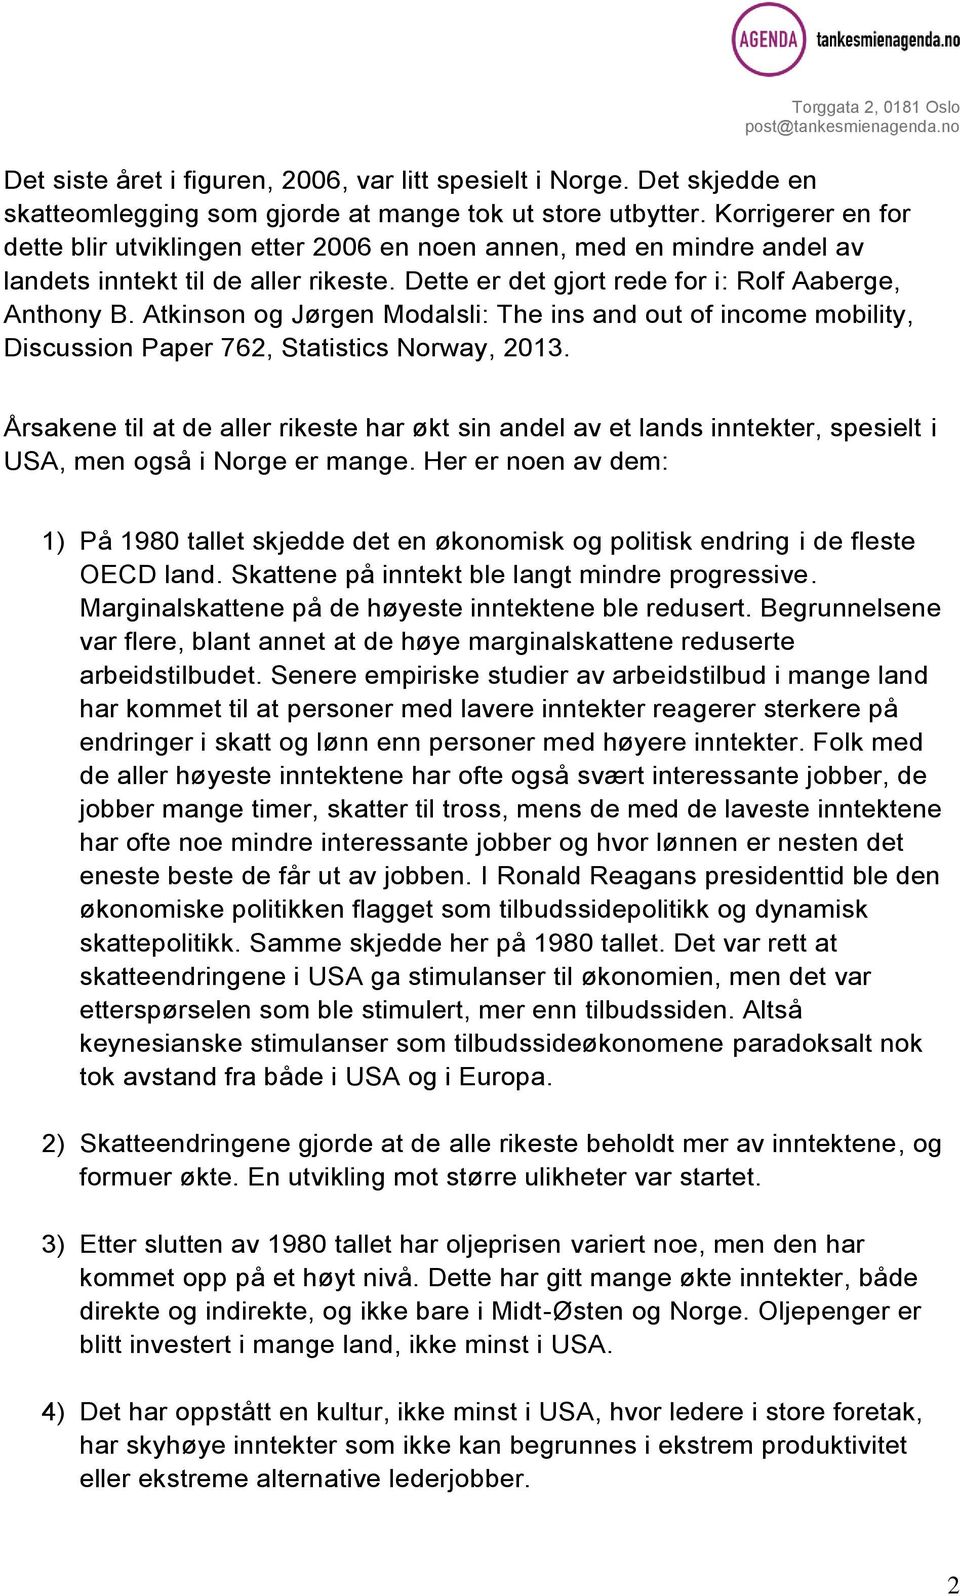 Atkinson og Jørgen Modalsli: The ins and out of income mobility, Discussion Paper 762, Statistics Norway, 2013.